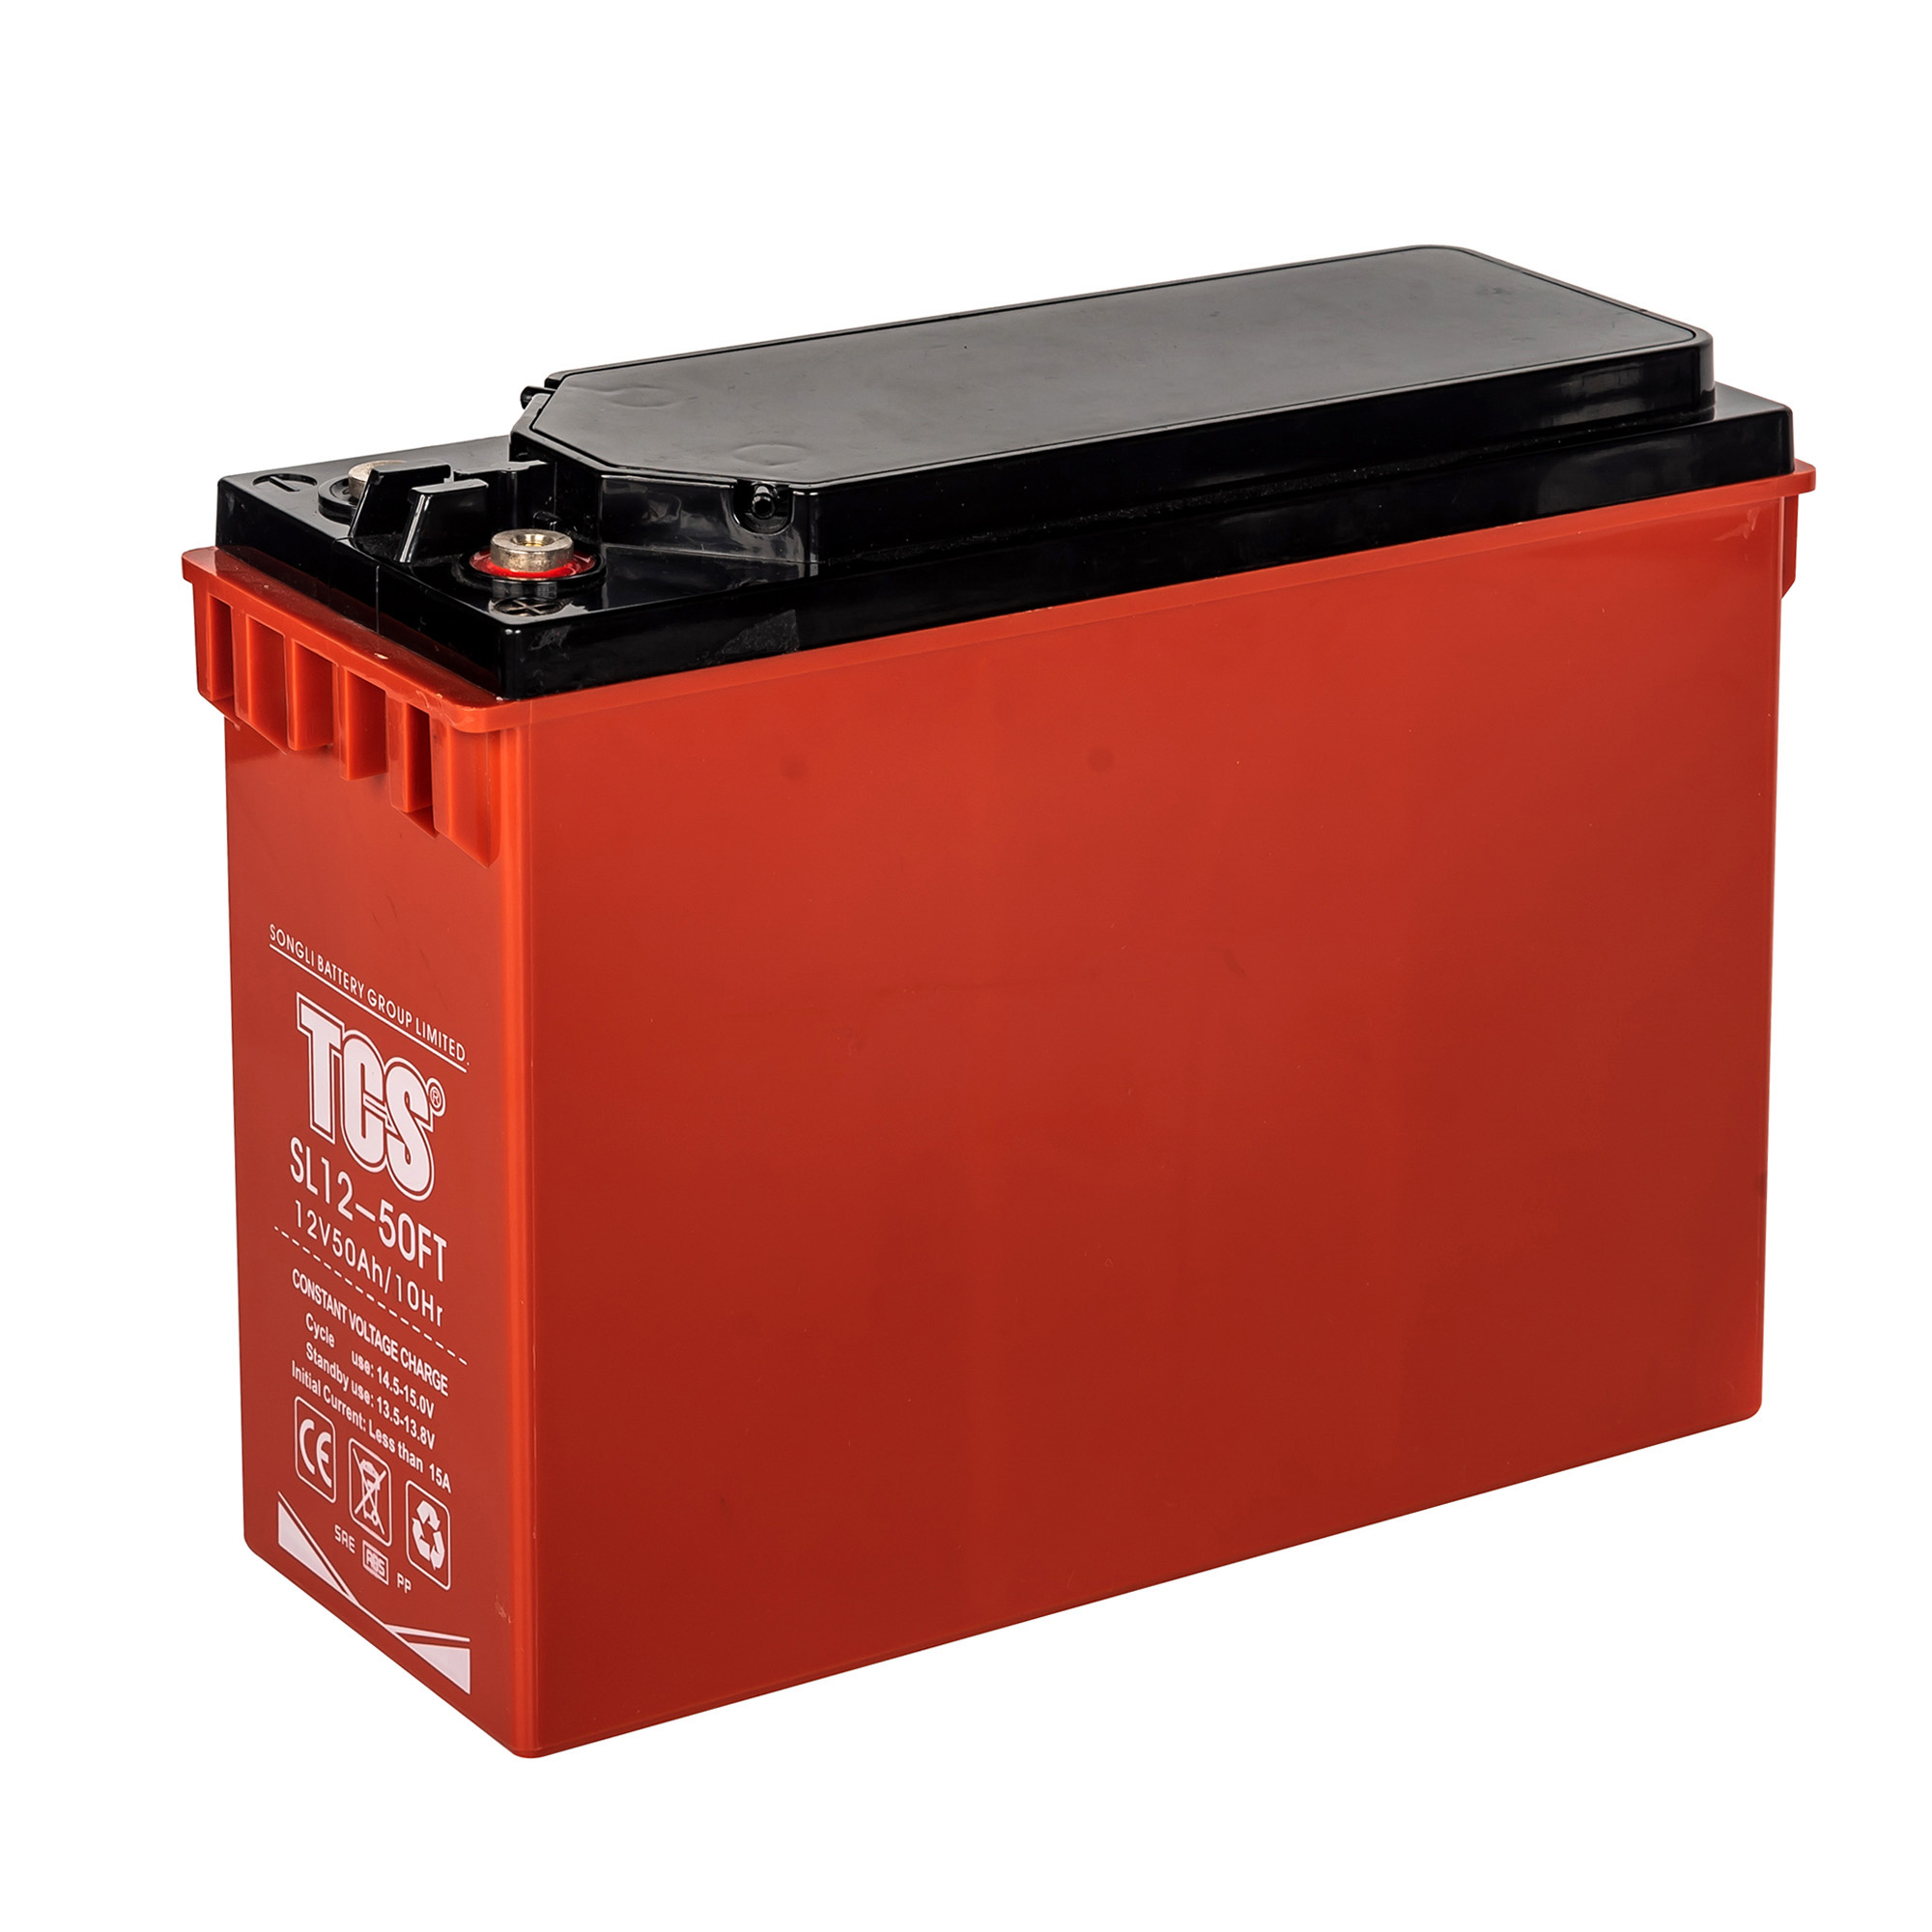 Solar backup battery front terminal SL12-50 FT Featured Image